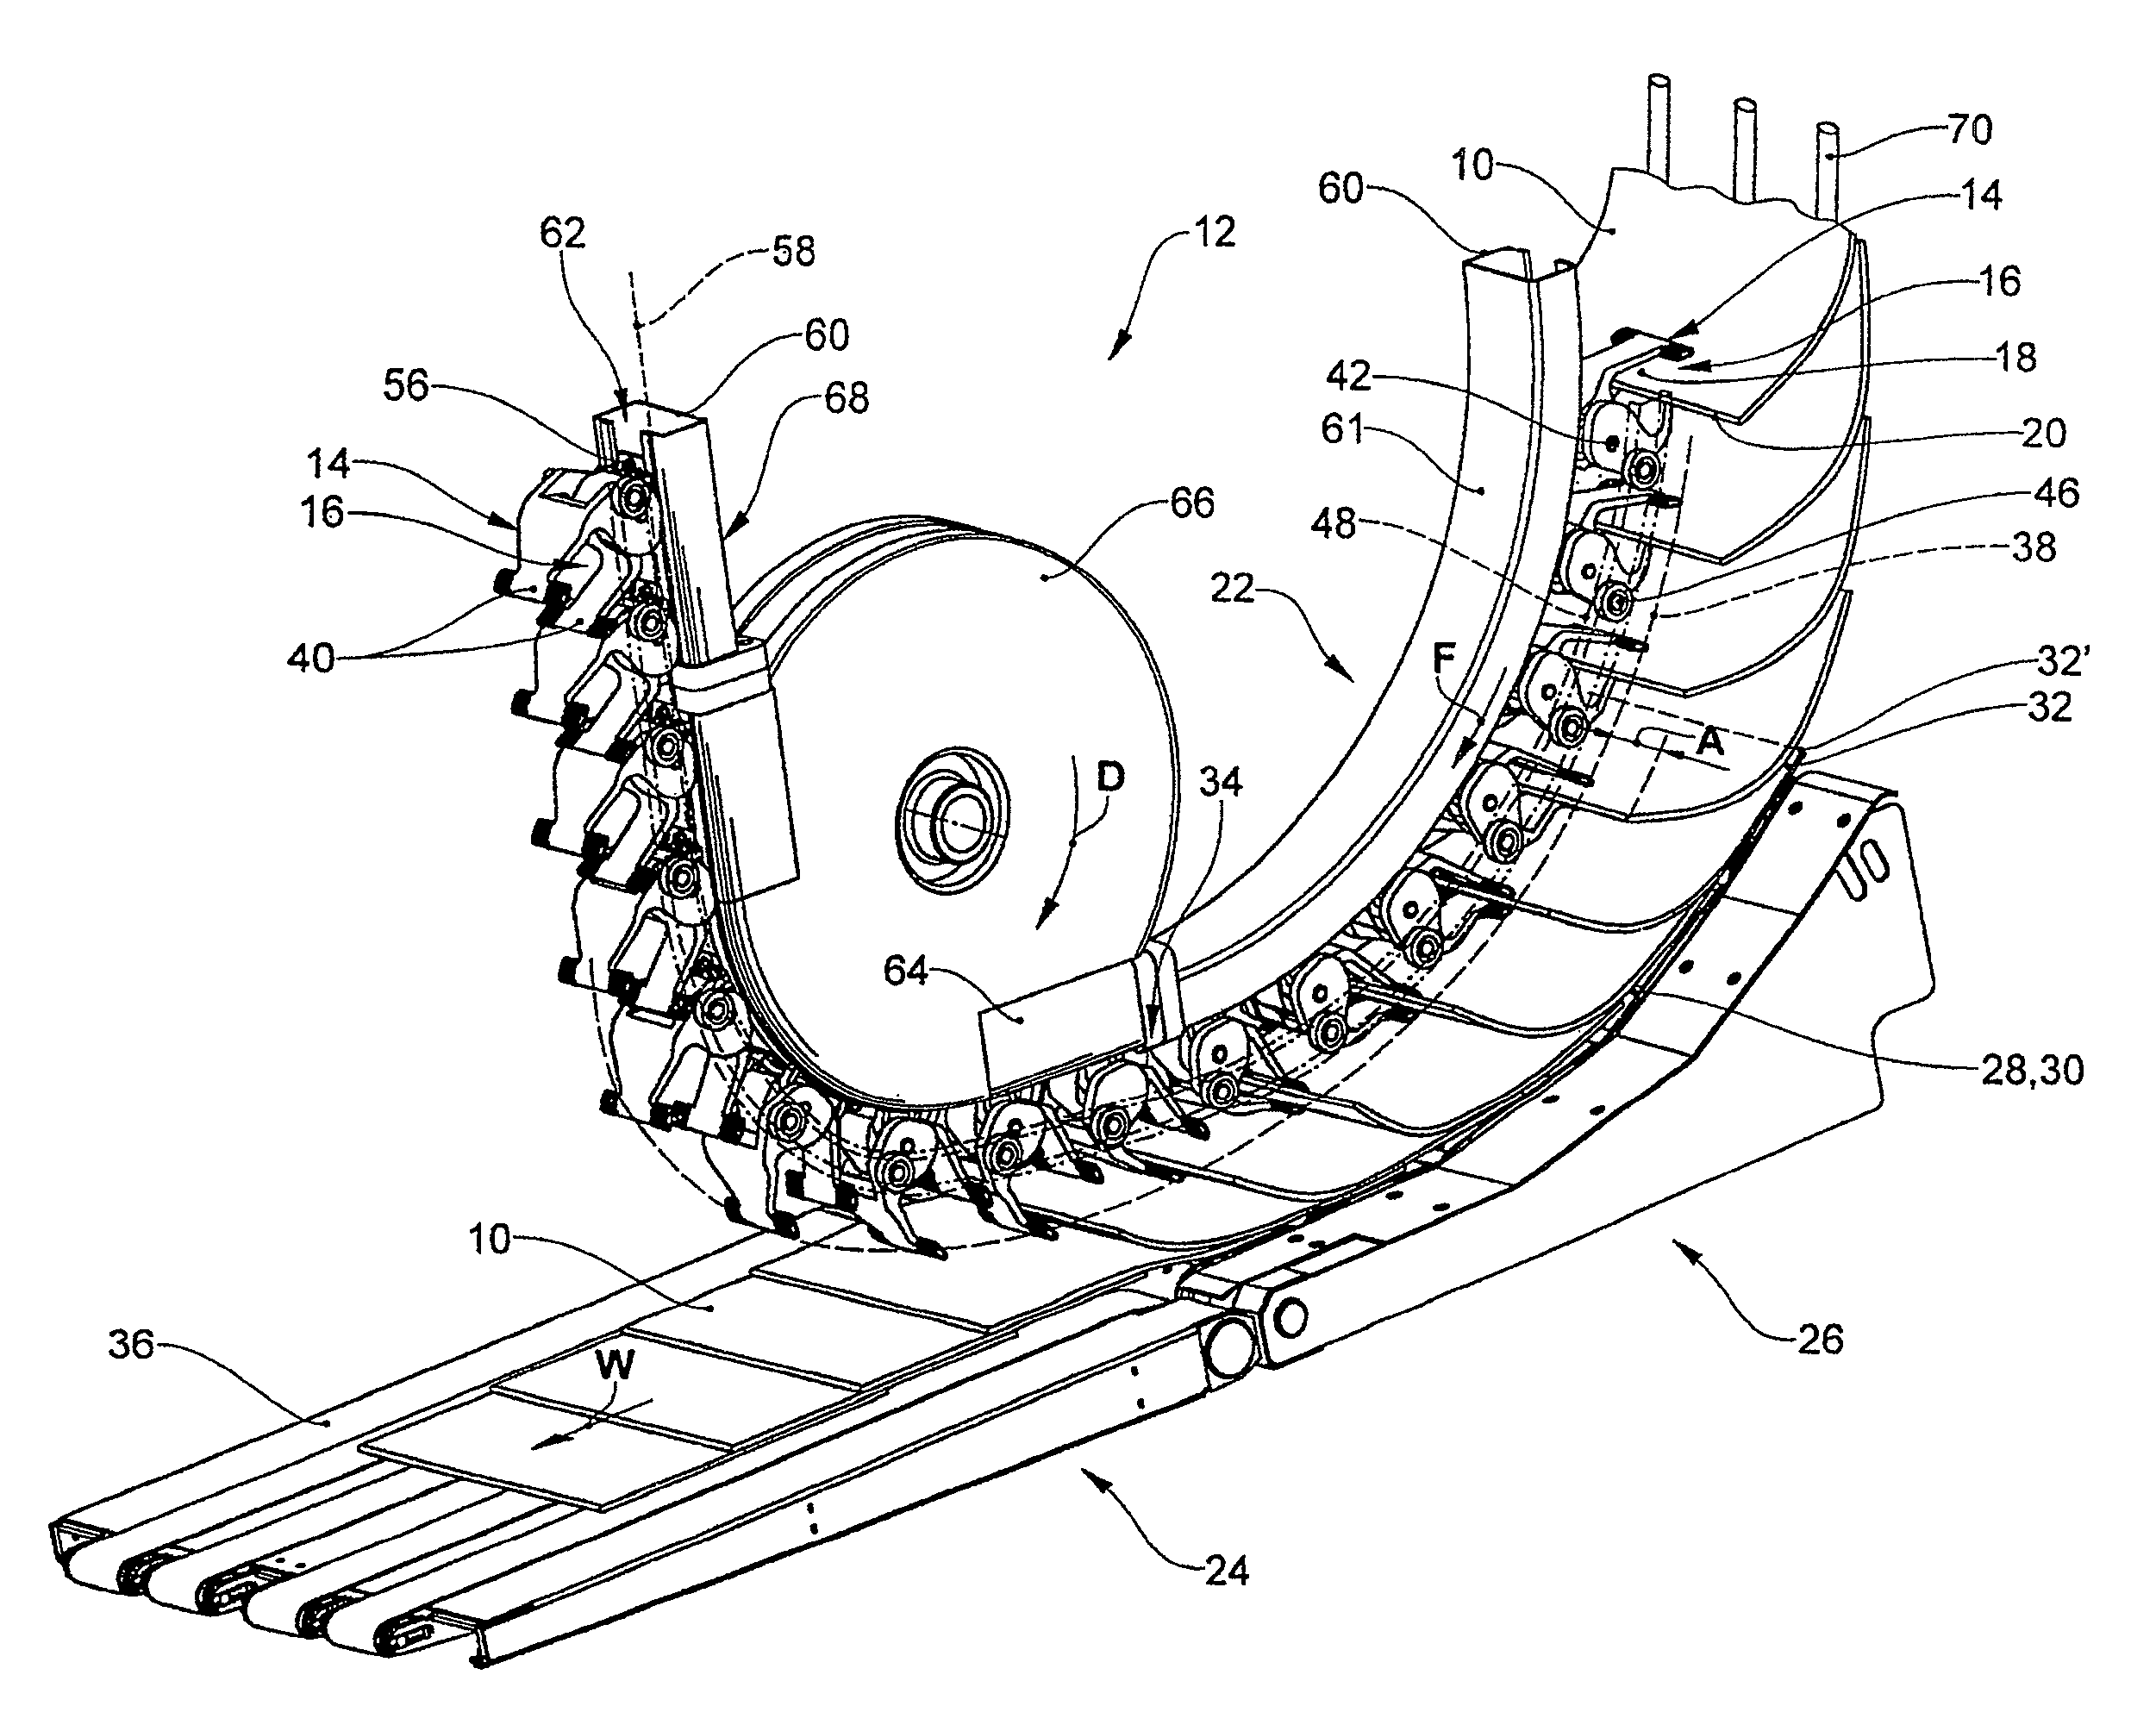 Apparatus and method for transporting flexible, planar products